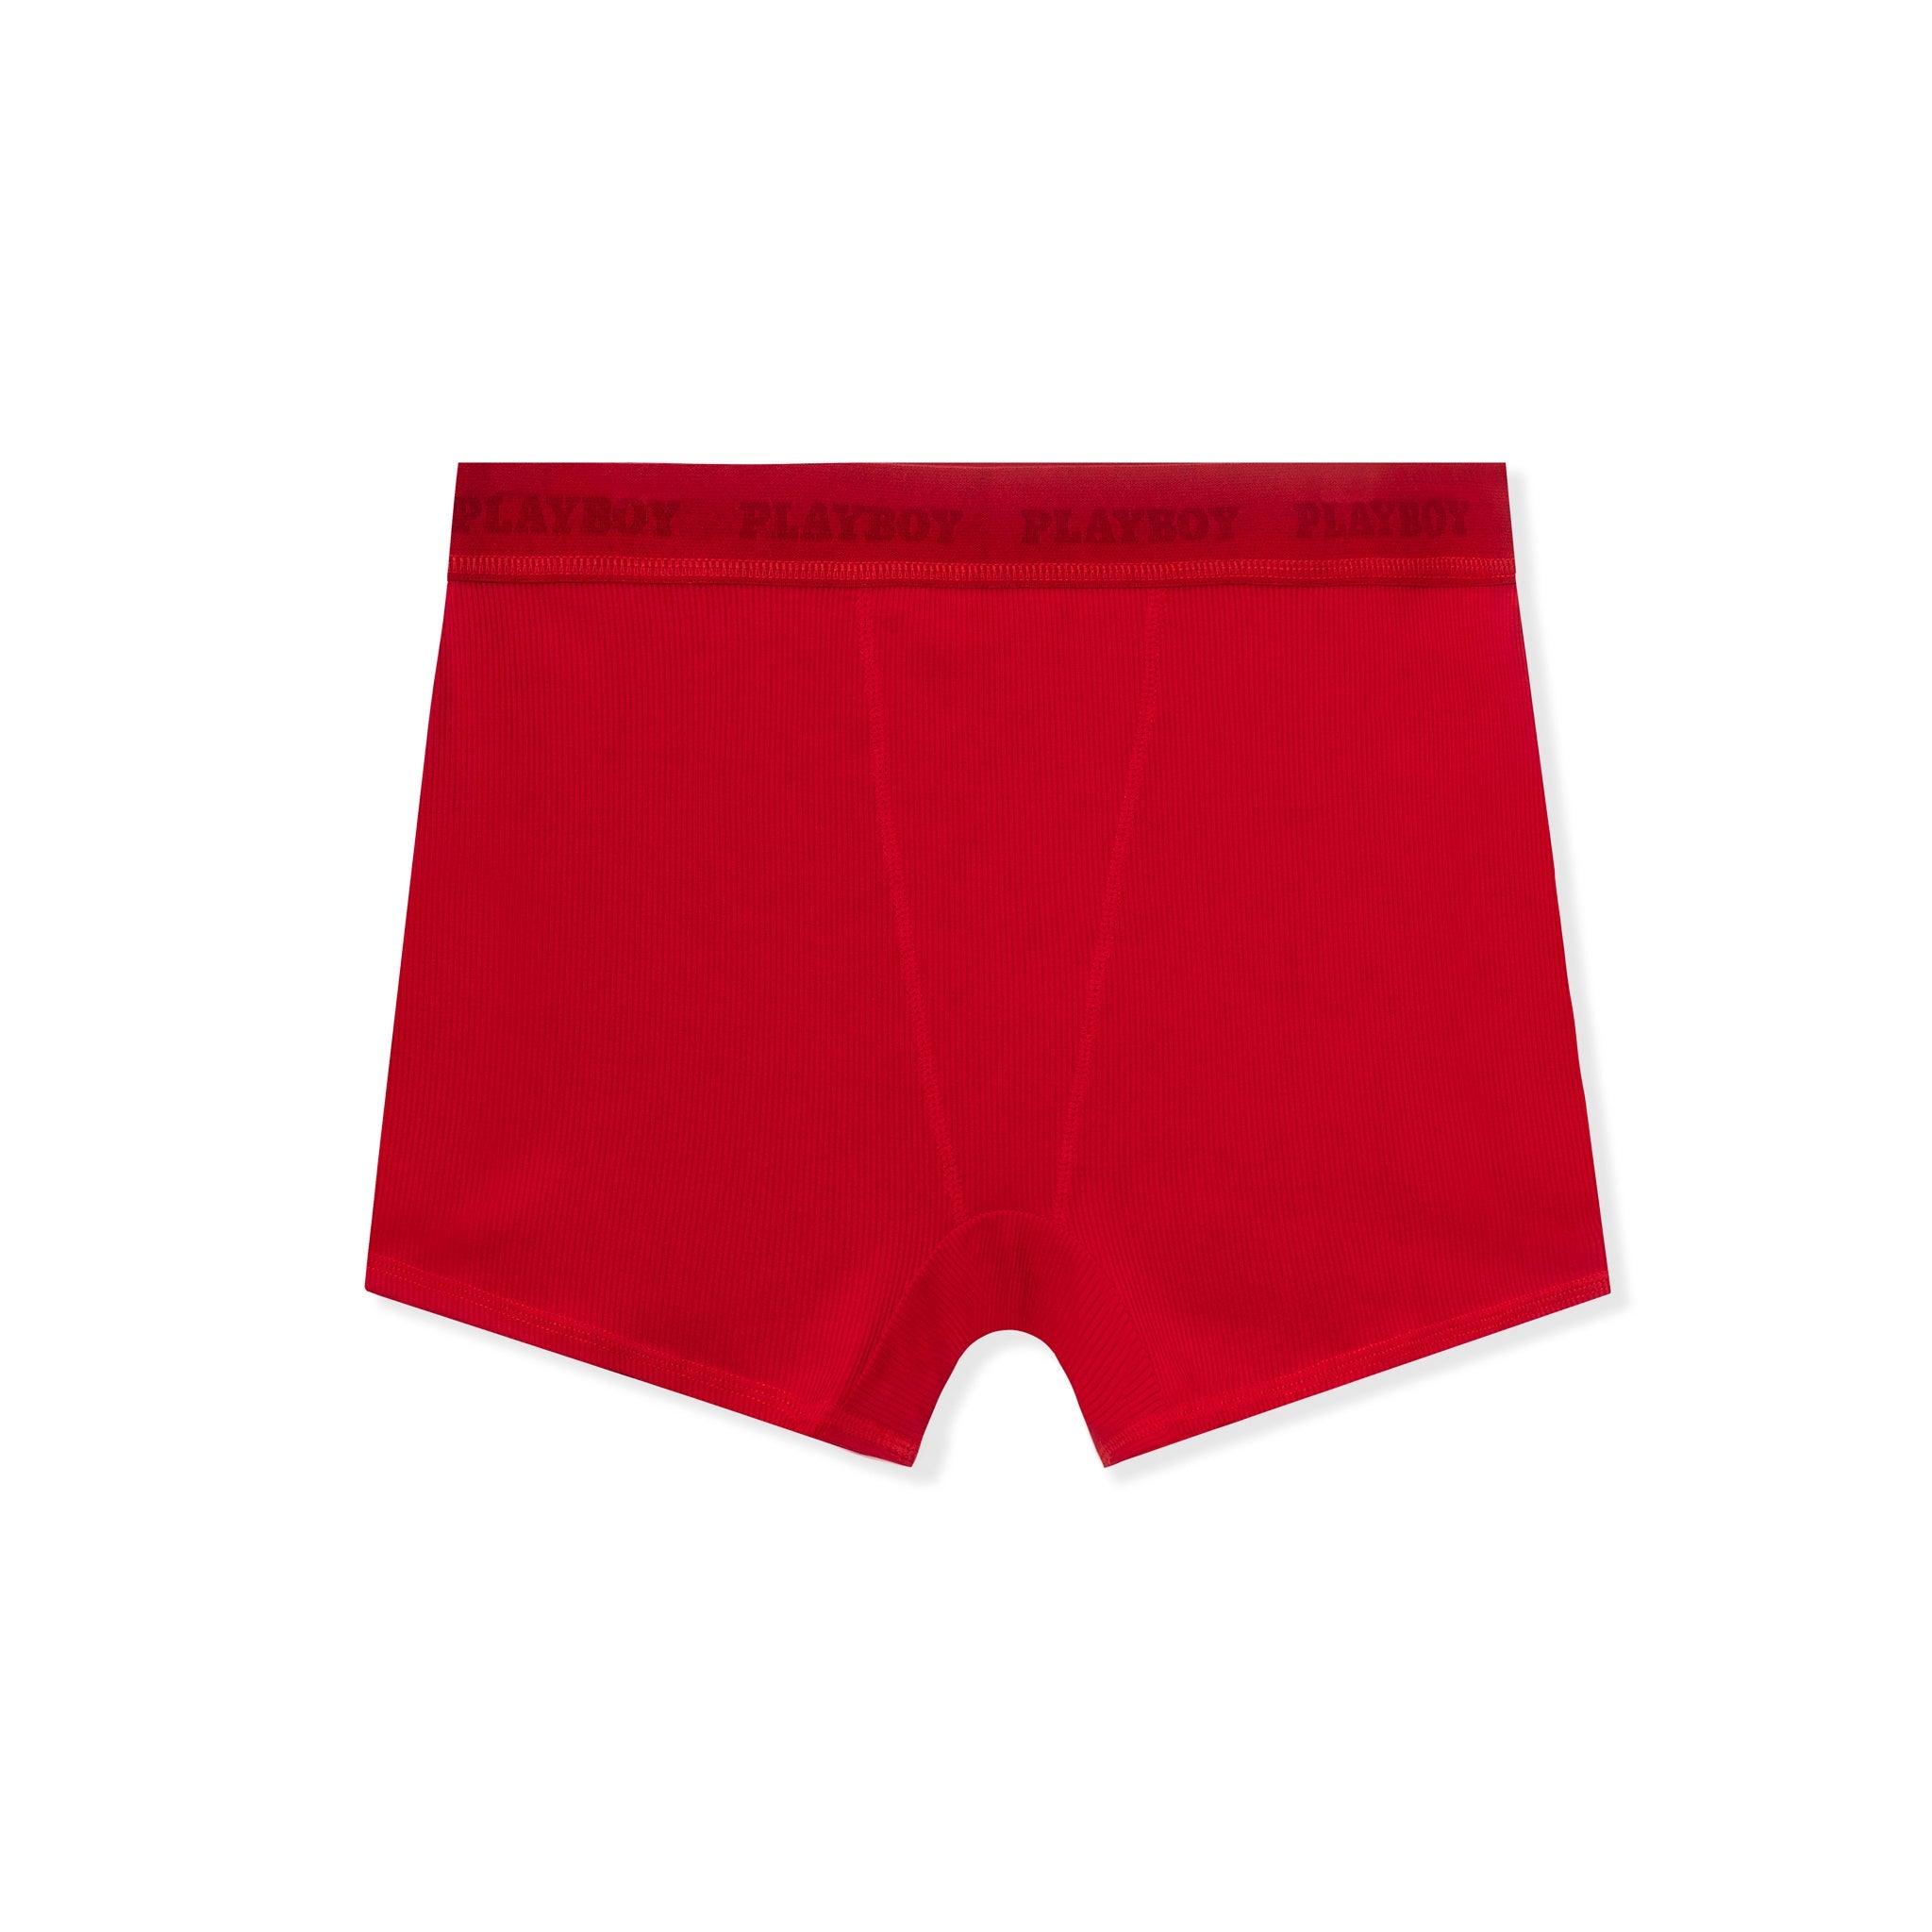 High Rise Boxer Brief Panty: Unforgettable Comfort by Playboy